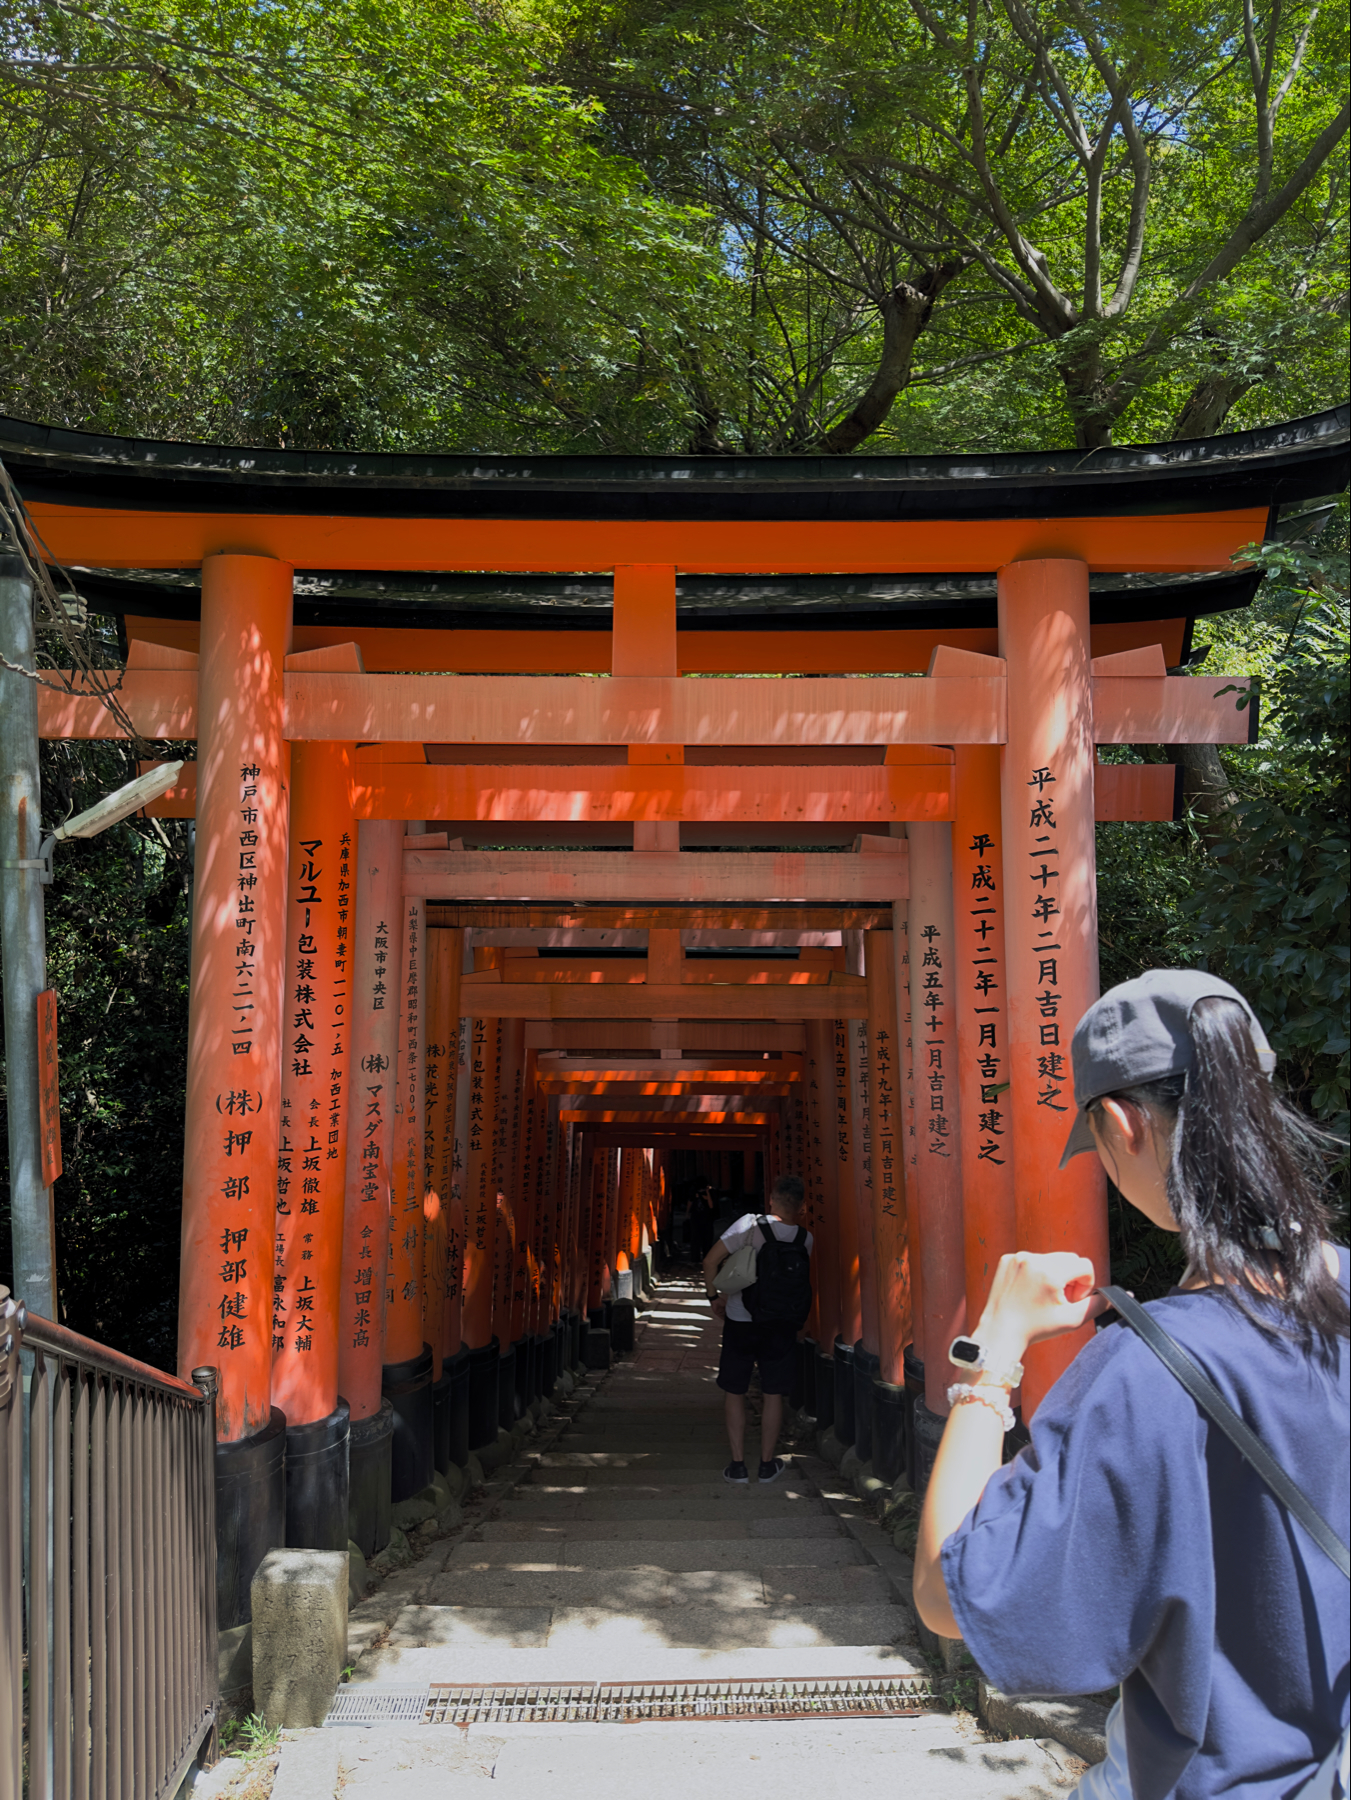 A tree-lined pathway leading through a series of traditional Japanese torii gates at Fushimi Inari Shrine in Kyoto, with visitors walking beneath the vermilion structures.